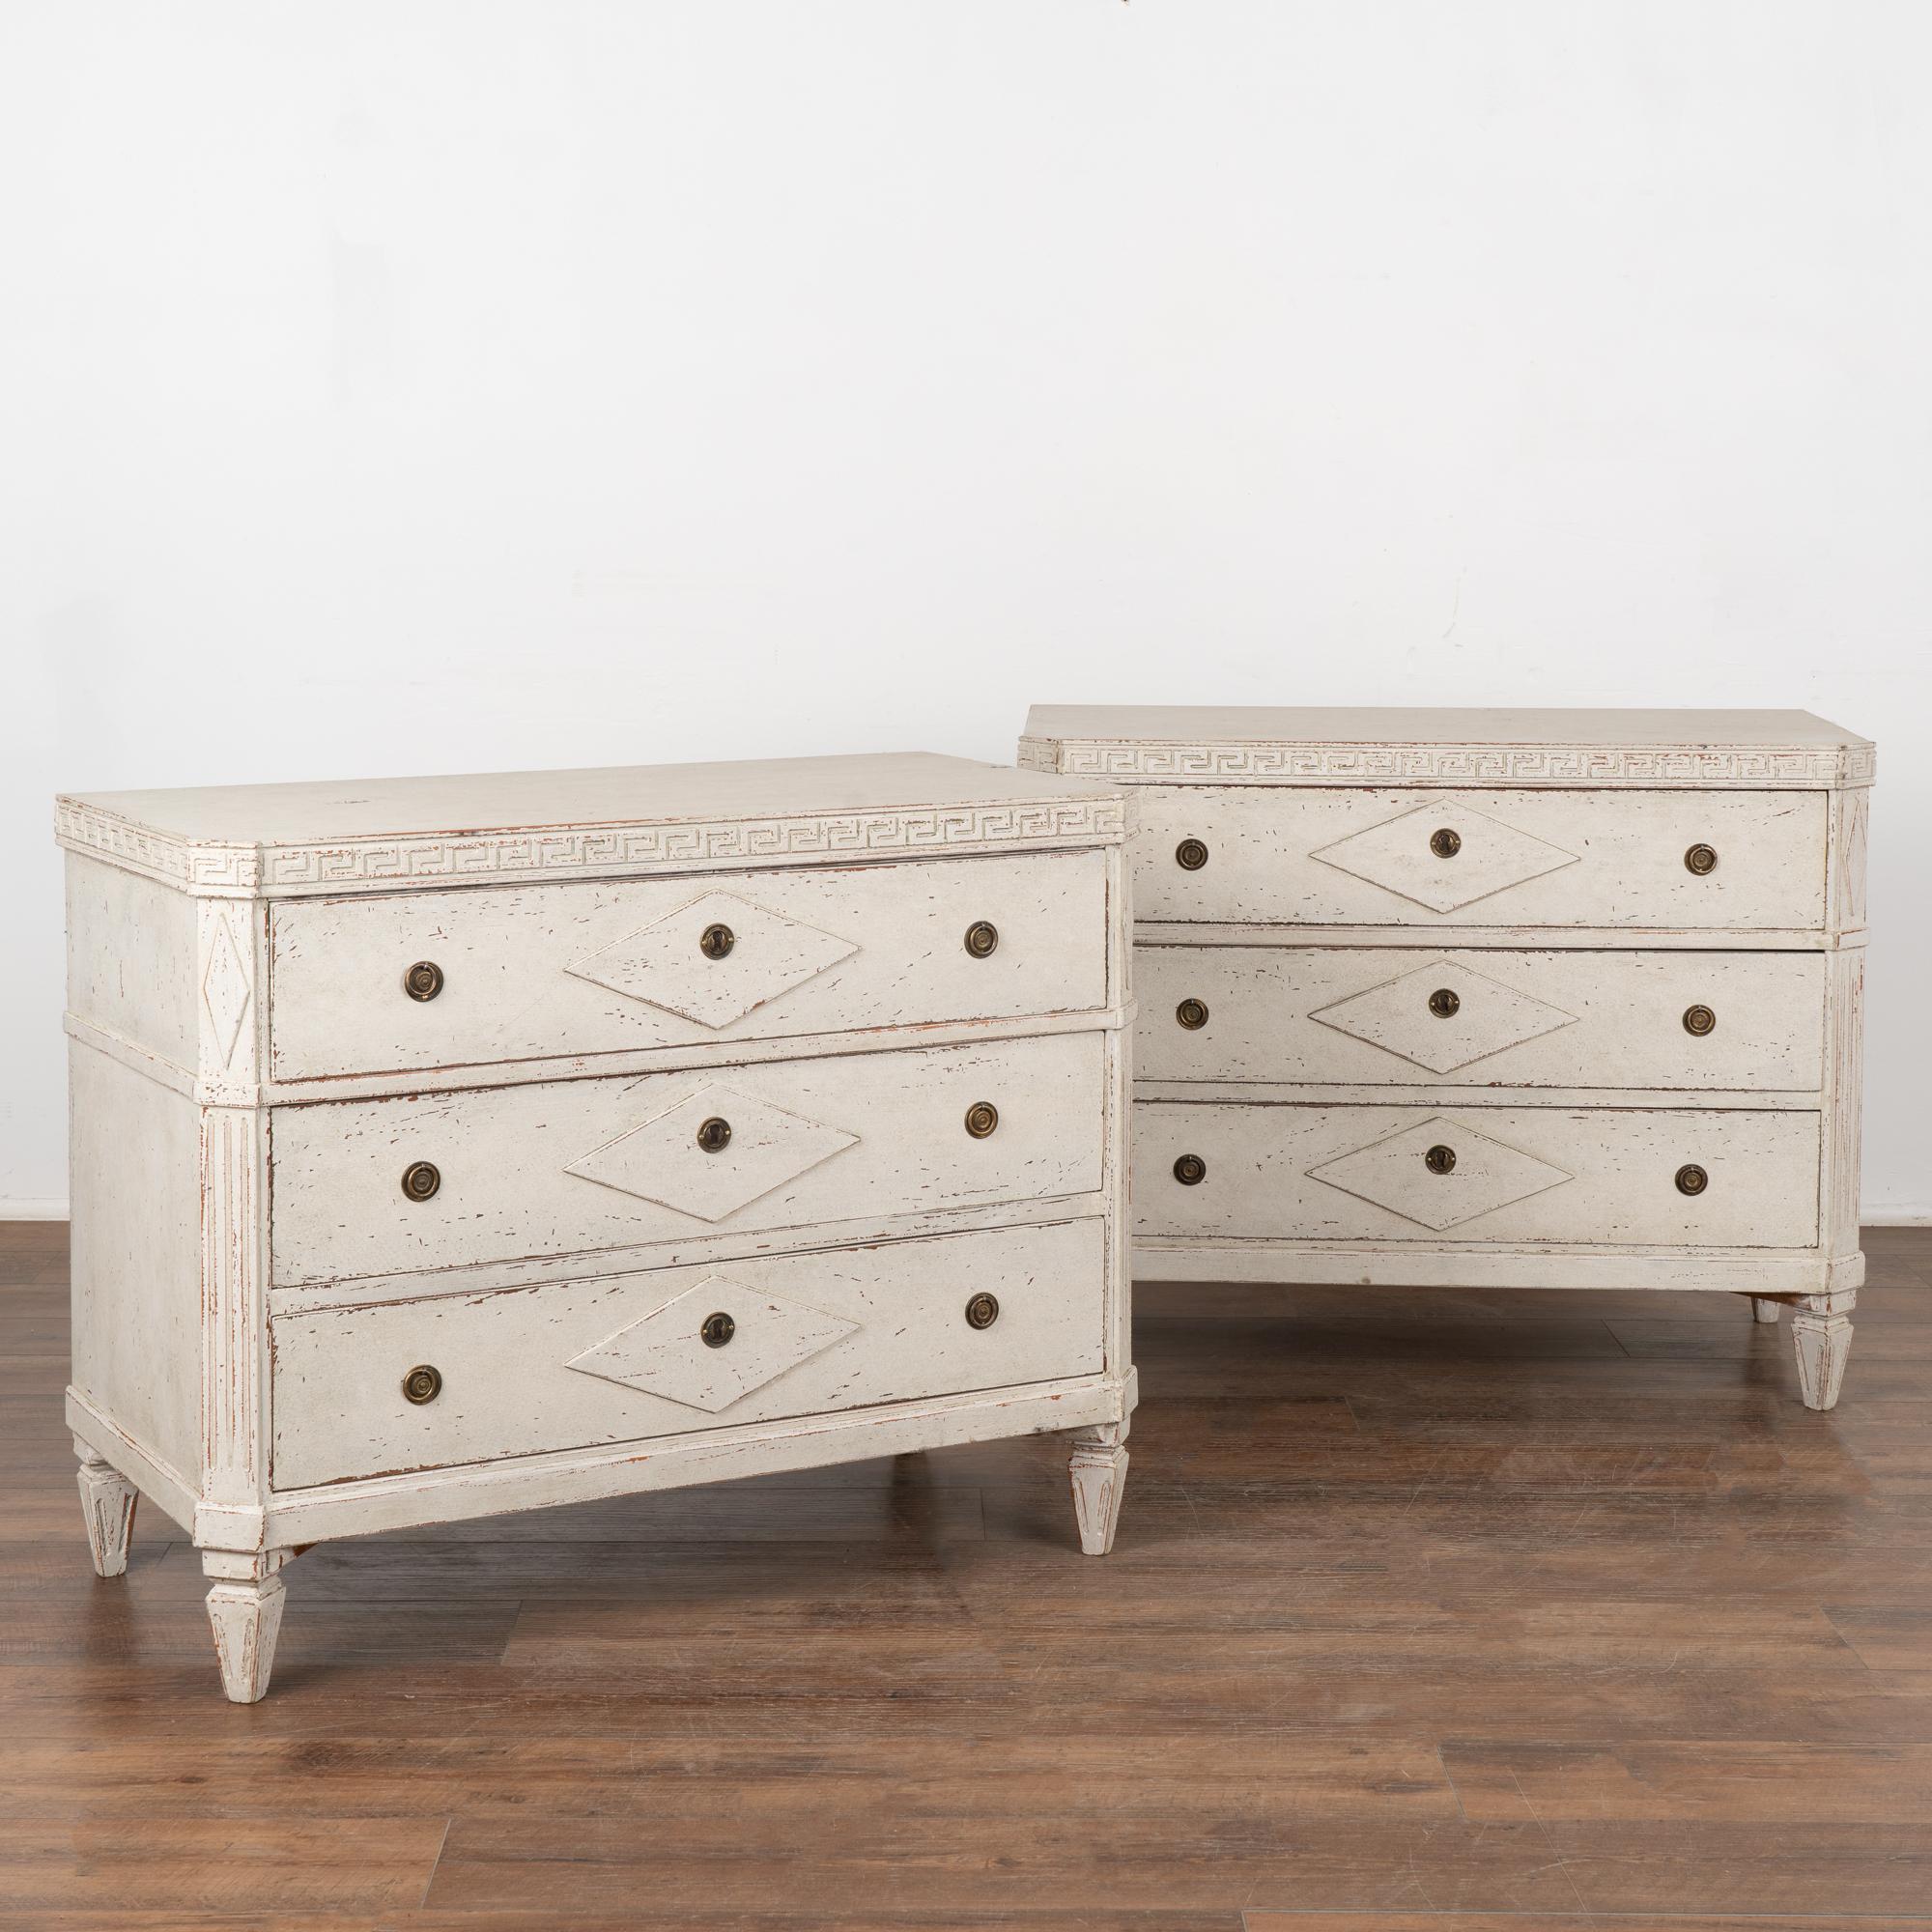 A pair of decorative Gustavian pine chest of drawers painted in shades of  white, fitting their Swedish origin.
Canted fluted side posts with upper carved diamond medallion, raised carved diamond panels along the three drawers, all setting on four